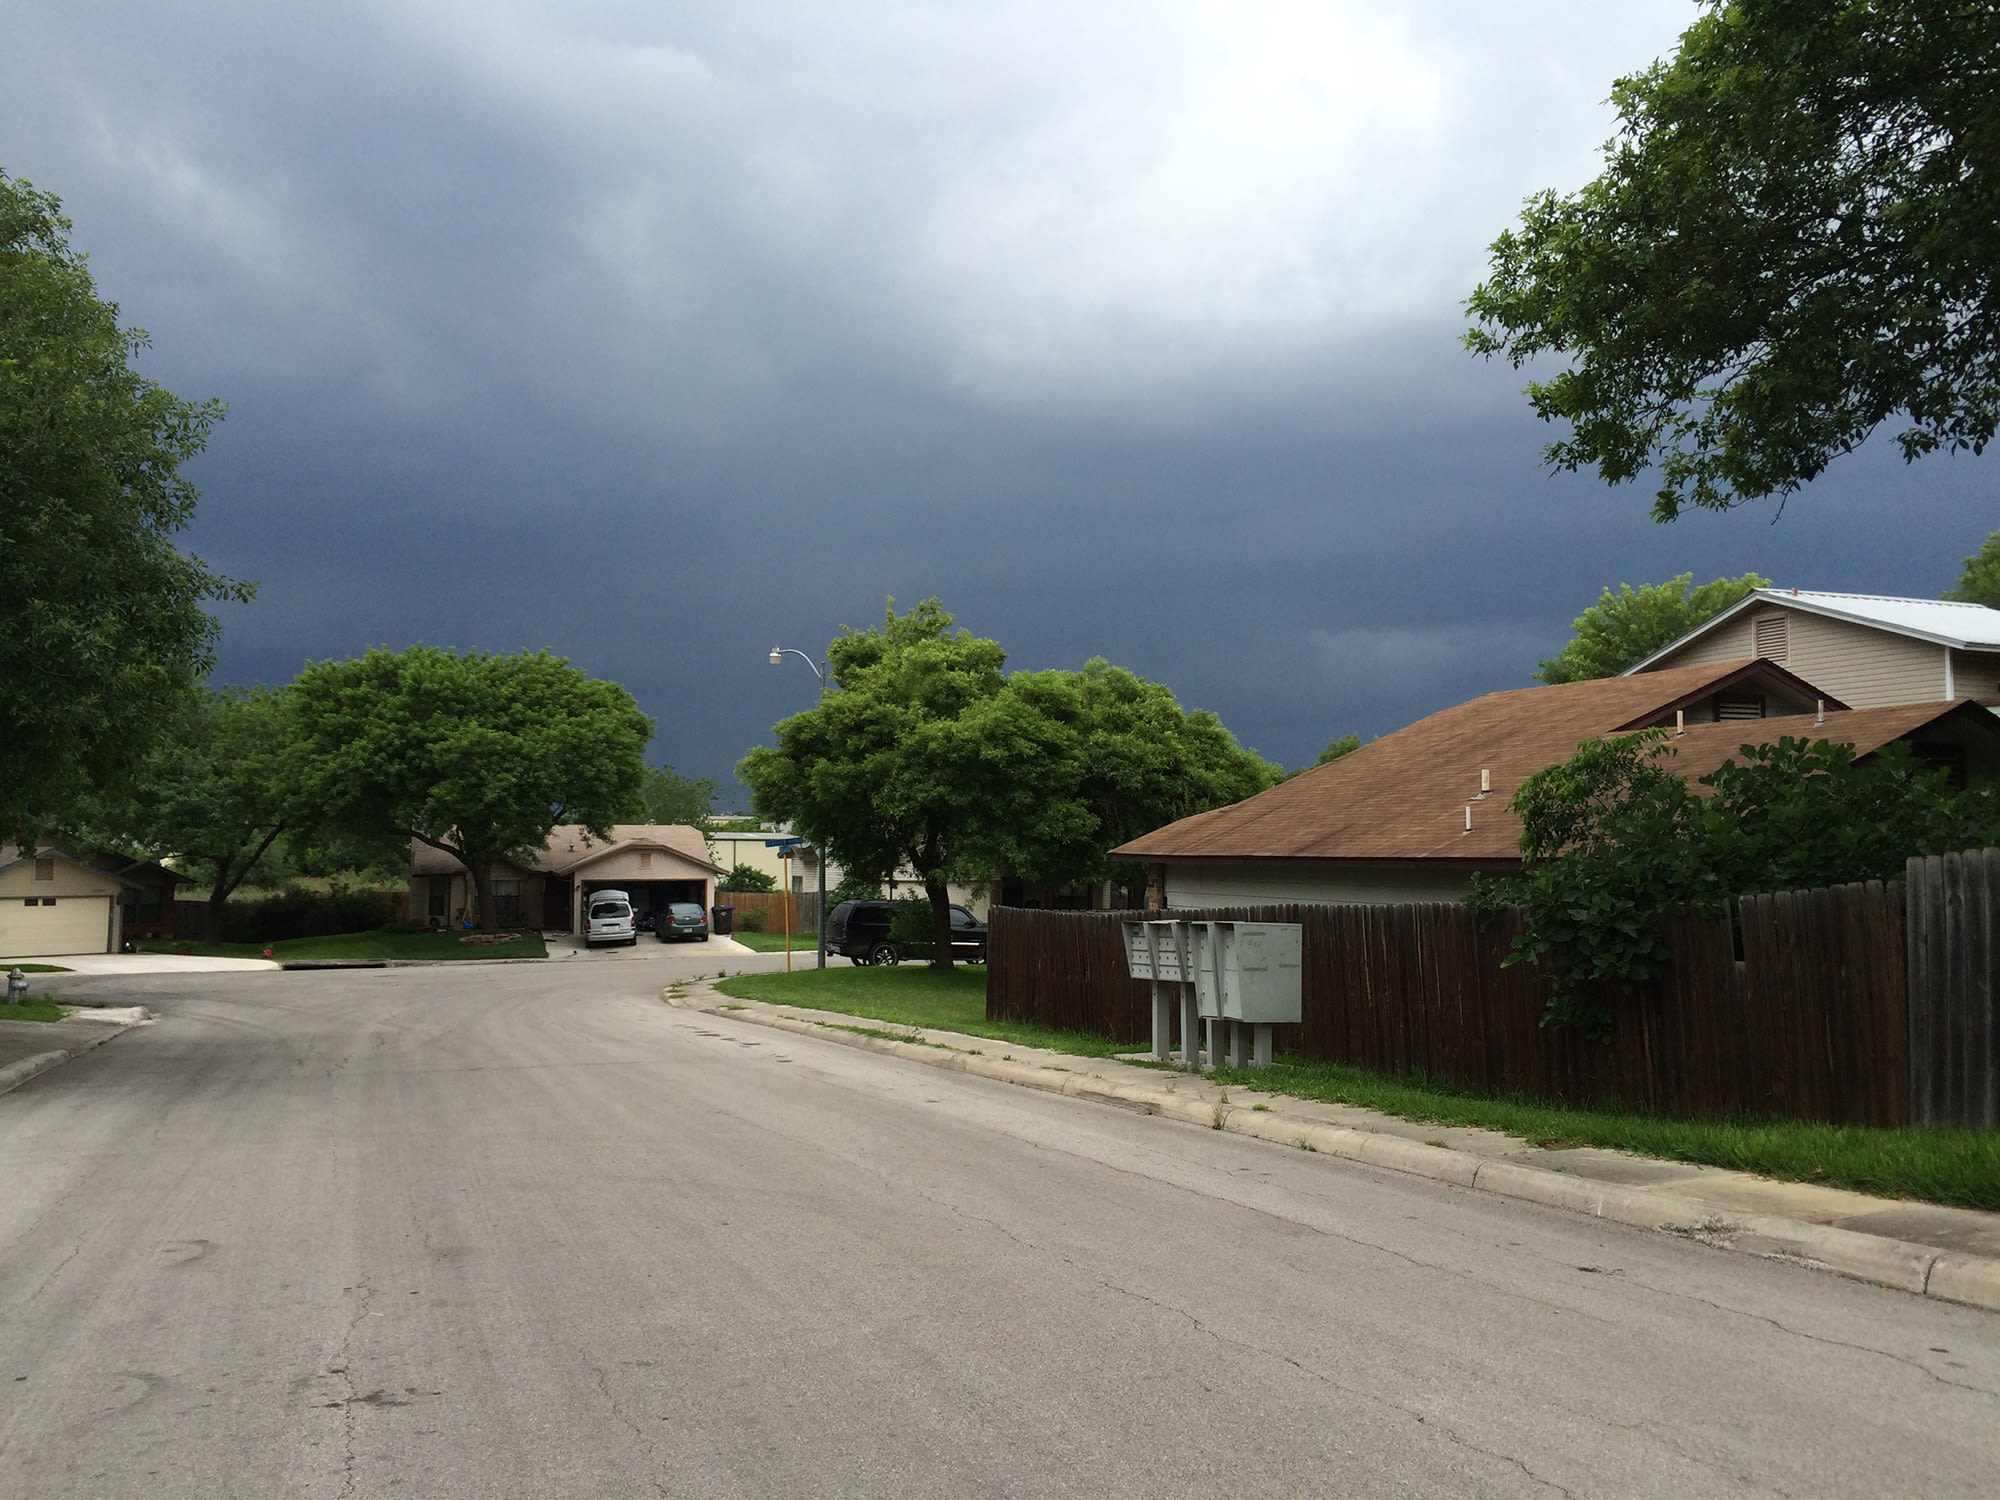 Isolated storm threat continues for Texas including San Antonio